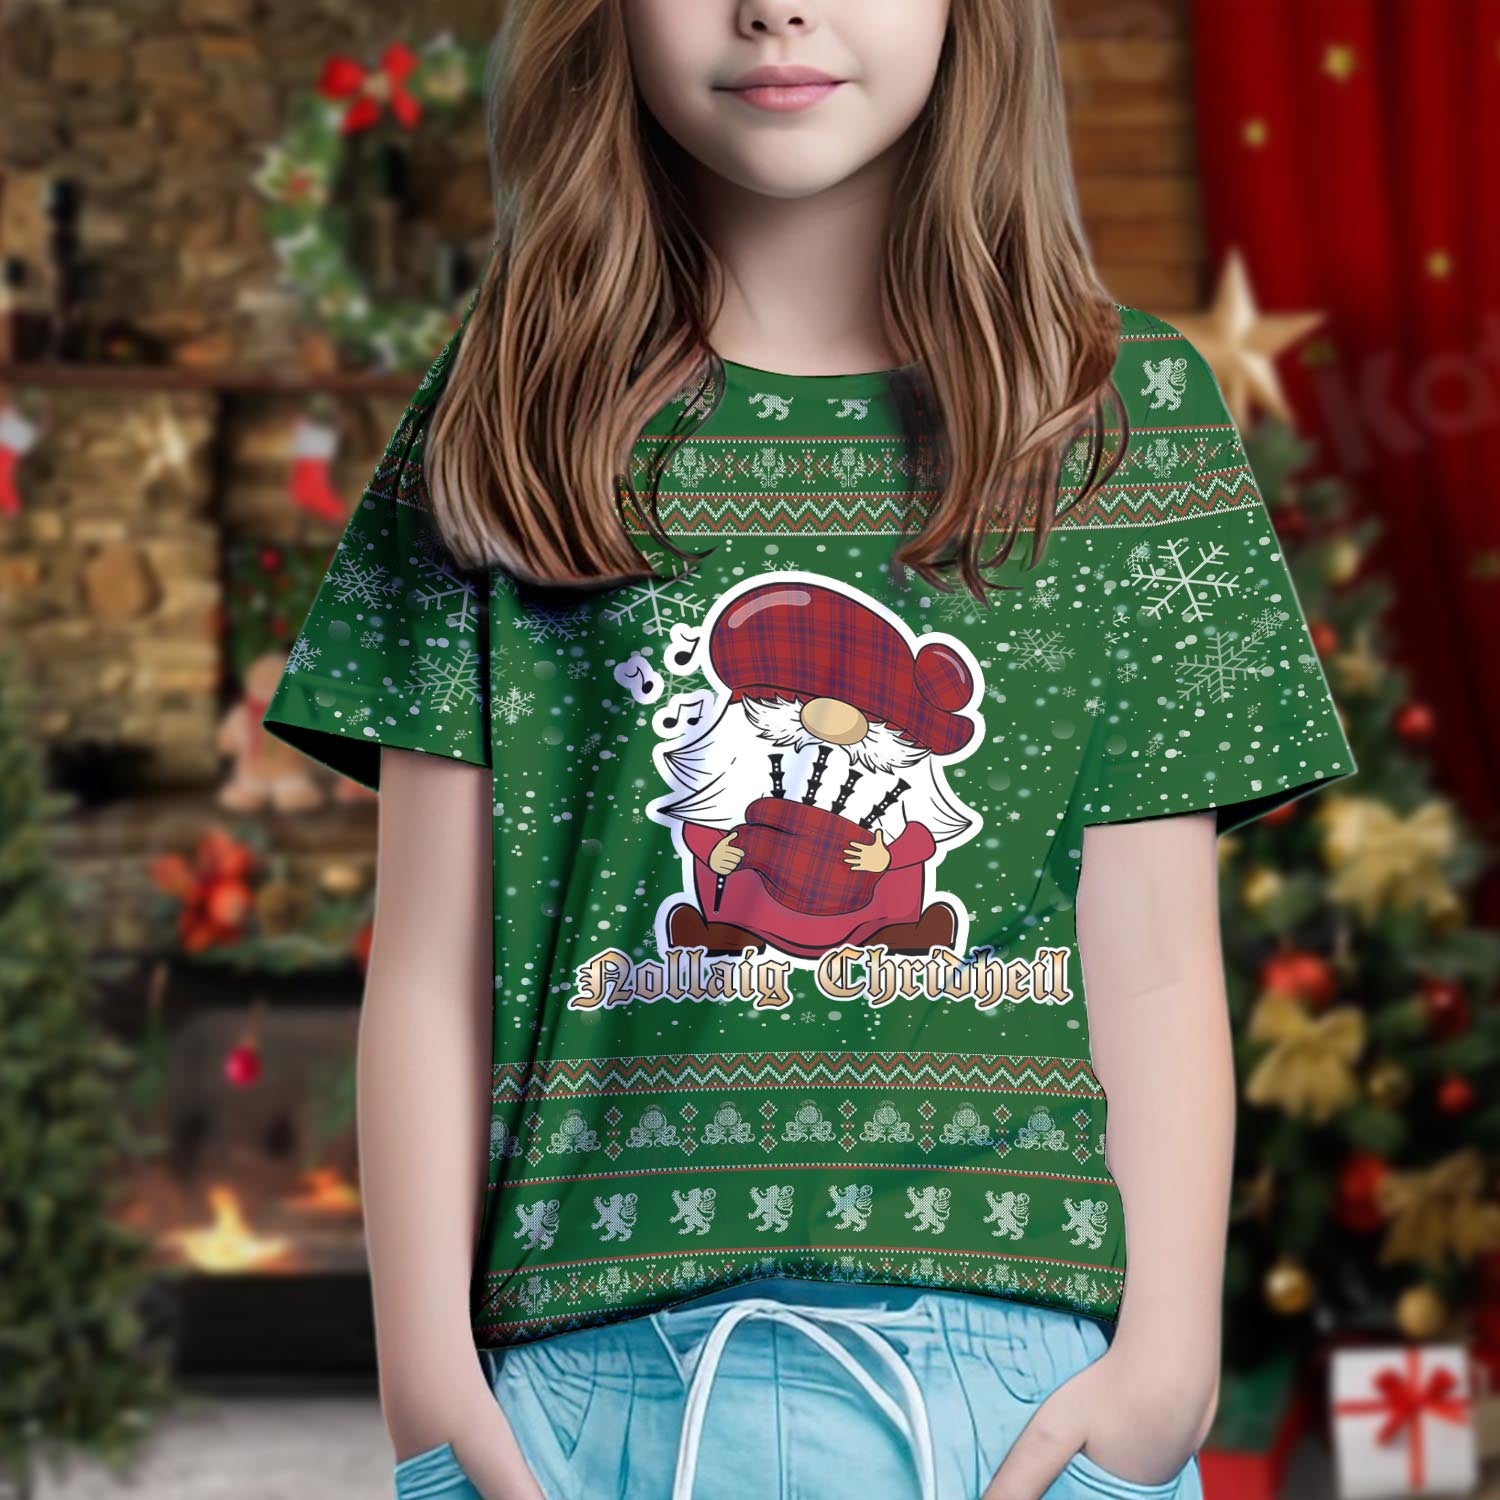 Kyle Clan Christmas Family T-Shirt with Funny Gnome Playing Bagpipes Kid's Shirt Green - Tartanvibesclothing